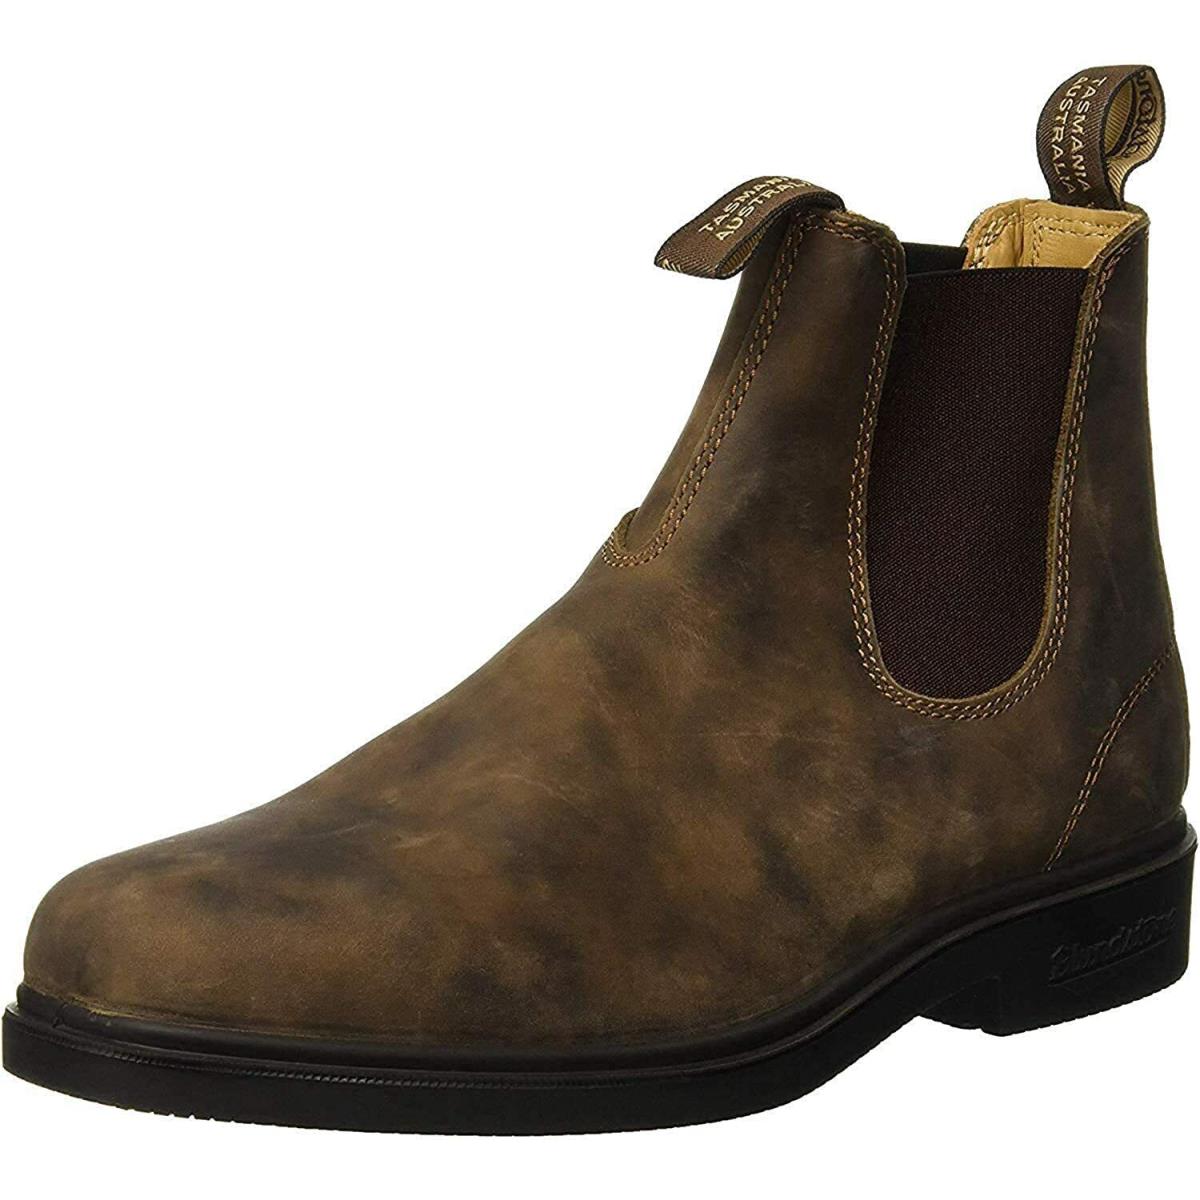 Men`s Blundstone Elastic Pull On Boots with Square Toe BL 1306 Rustic Brown